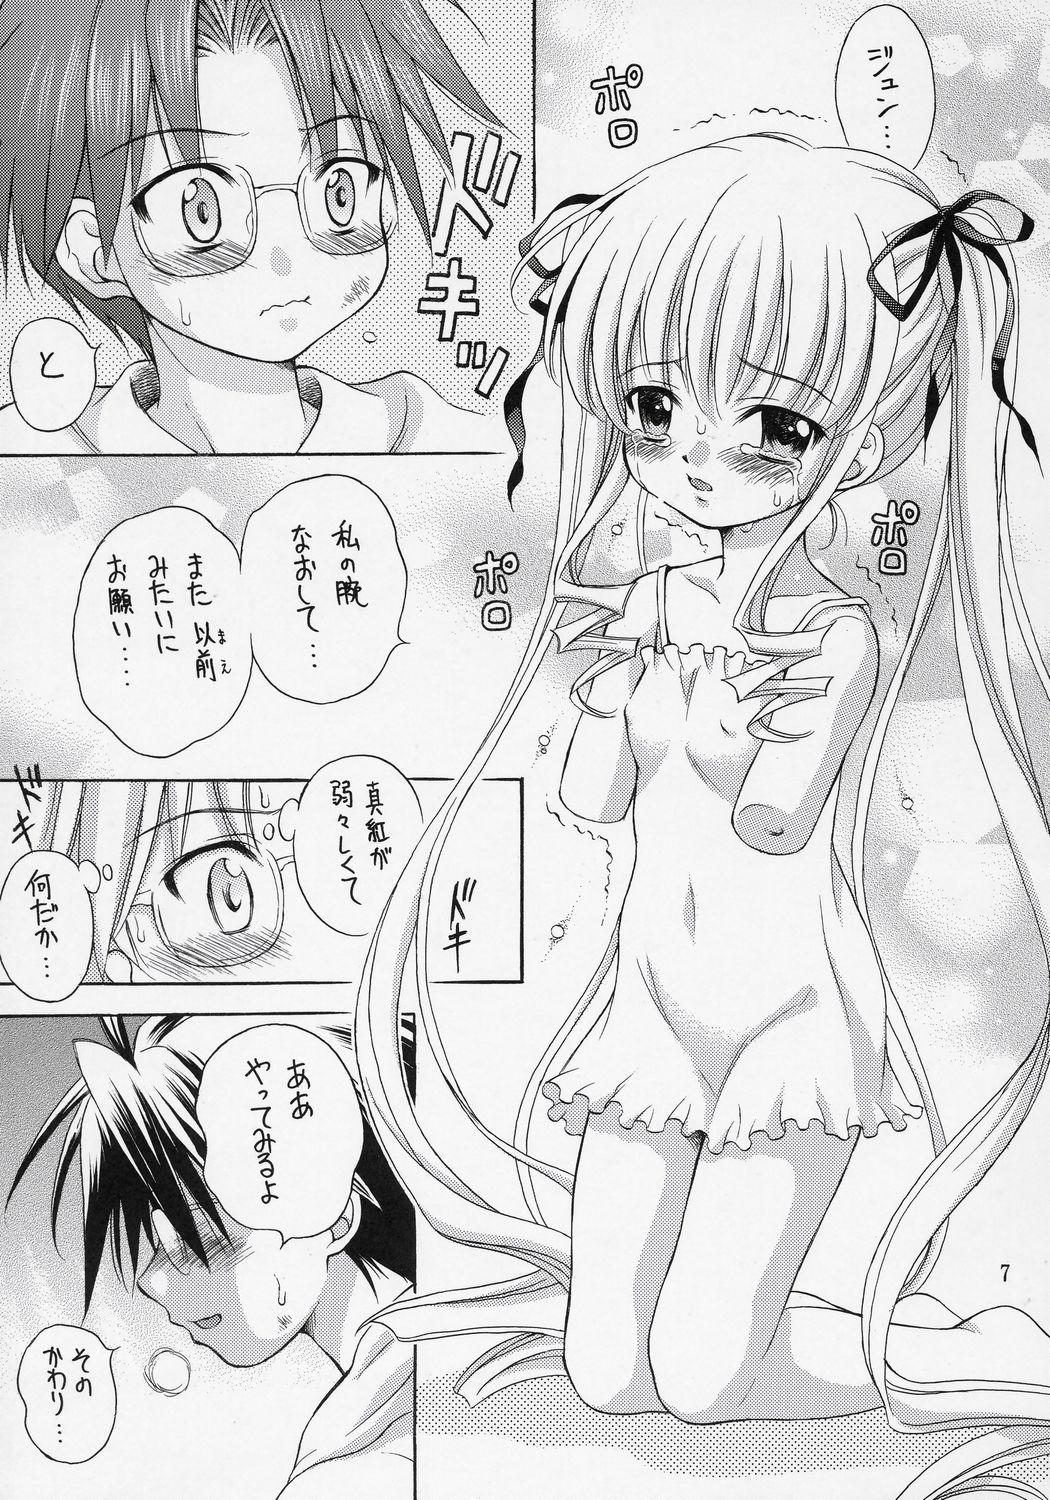 Blackmail Ningyou Ai 6 - Rozen maiden Tanned - Page 6